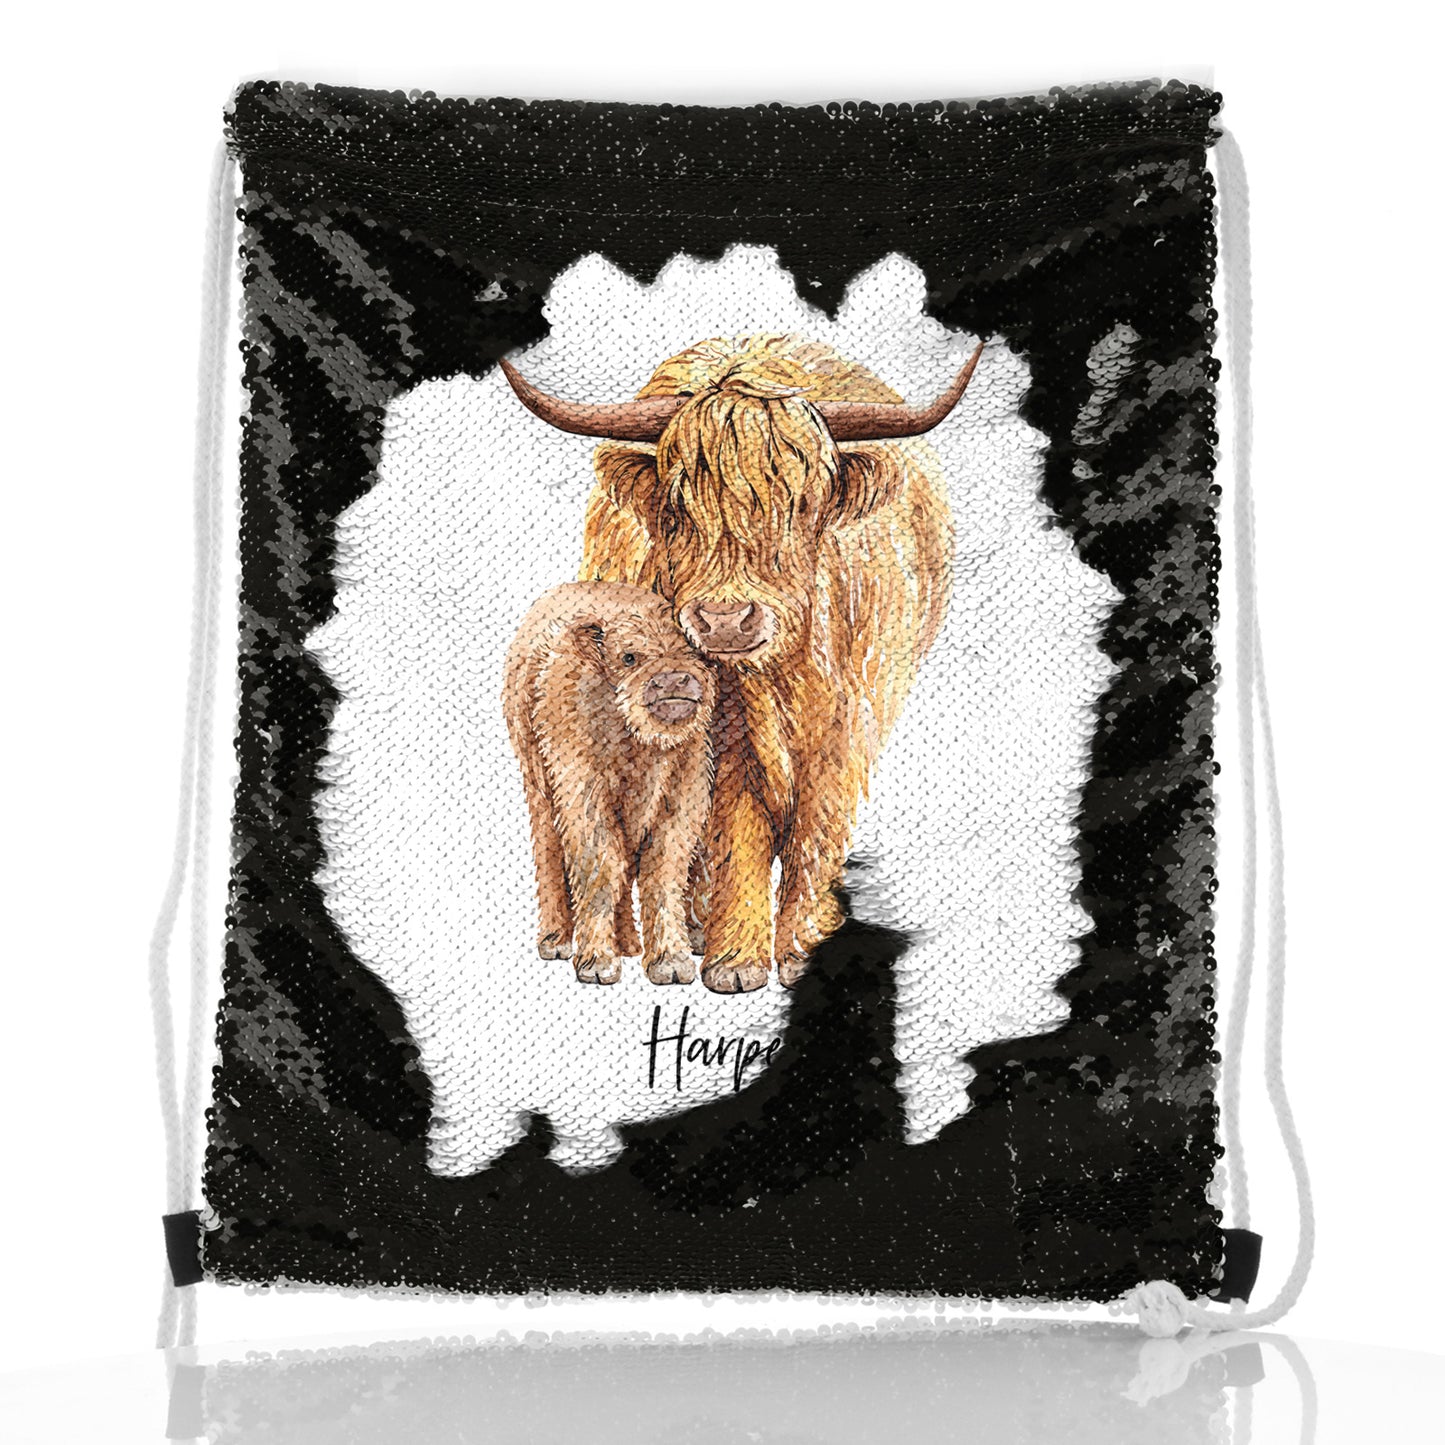 Personalised Sequin Drawstring Backpack with Welcoming Text and Relaxing Mum and Baby Highland Cows